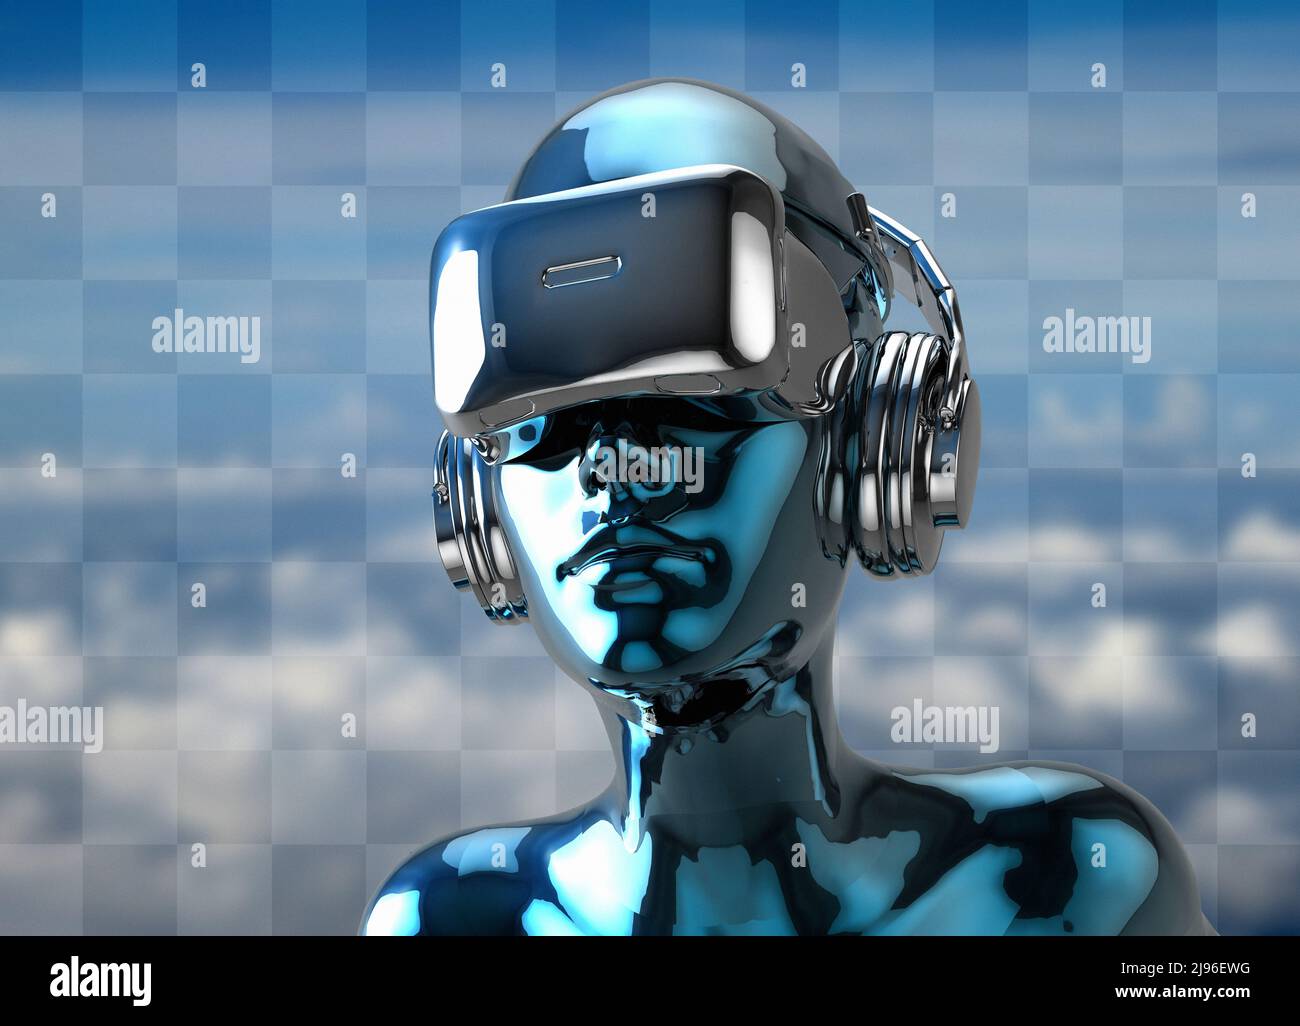 Person wearing a virtual reality headset, illustration Stock Photo